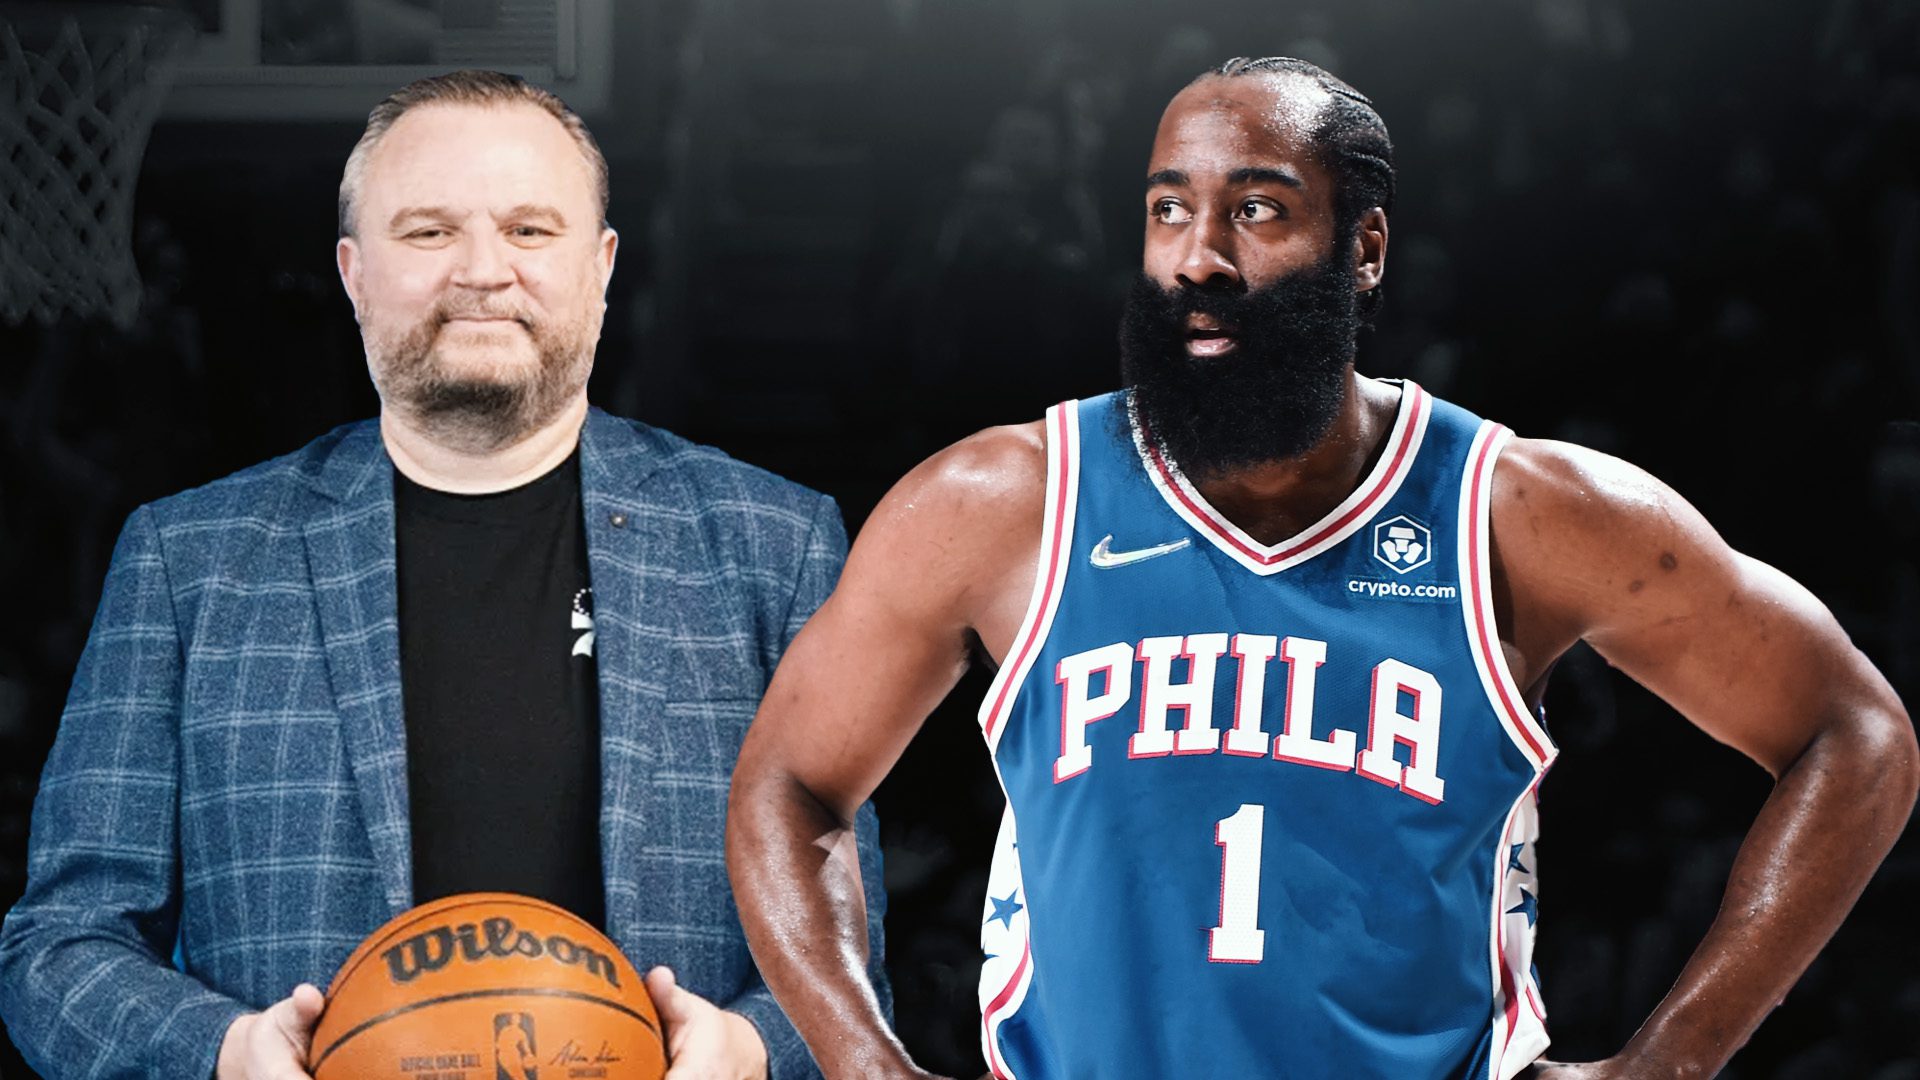 Inside James Harden’s Decision to Publicly Call Out Daryl Morey